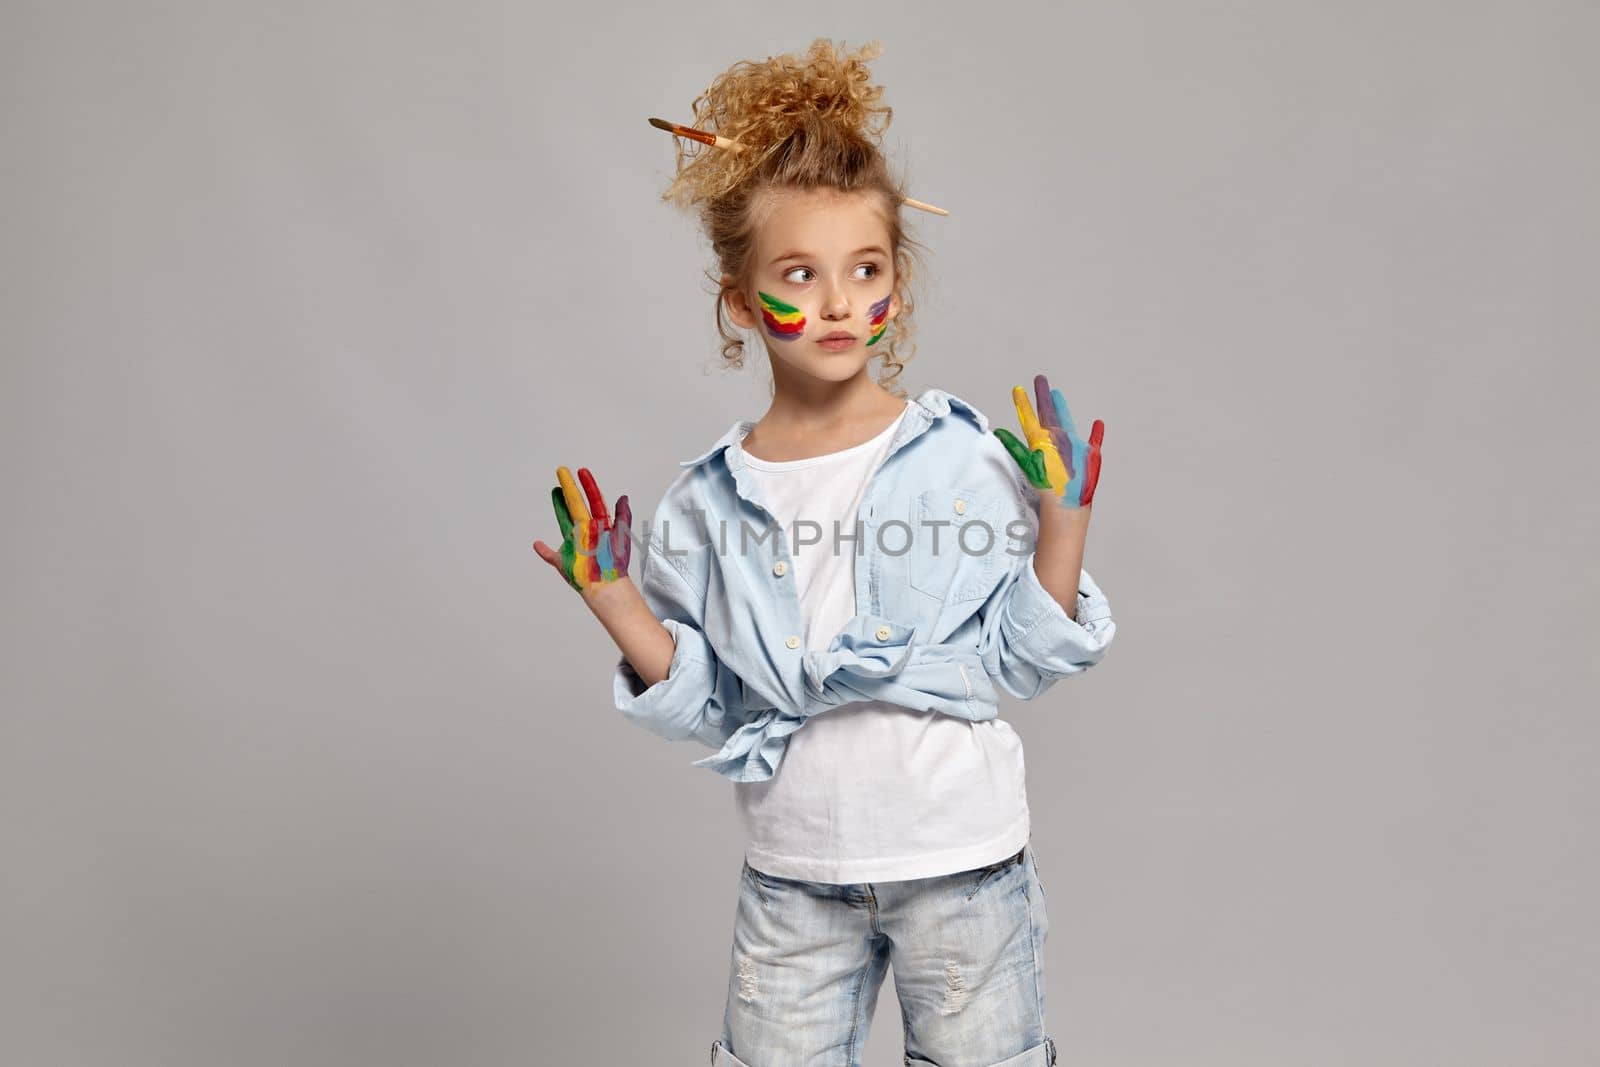 Lovely little girl having a brush in her chic hairstyle, wearing in a blue shirt and white t-shirt. She raised her painted hands up and looking away, on a gray background.